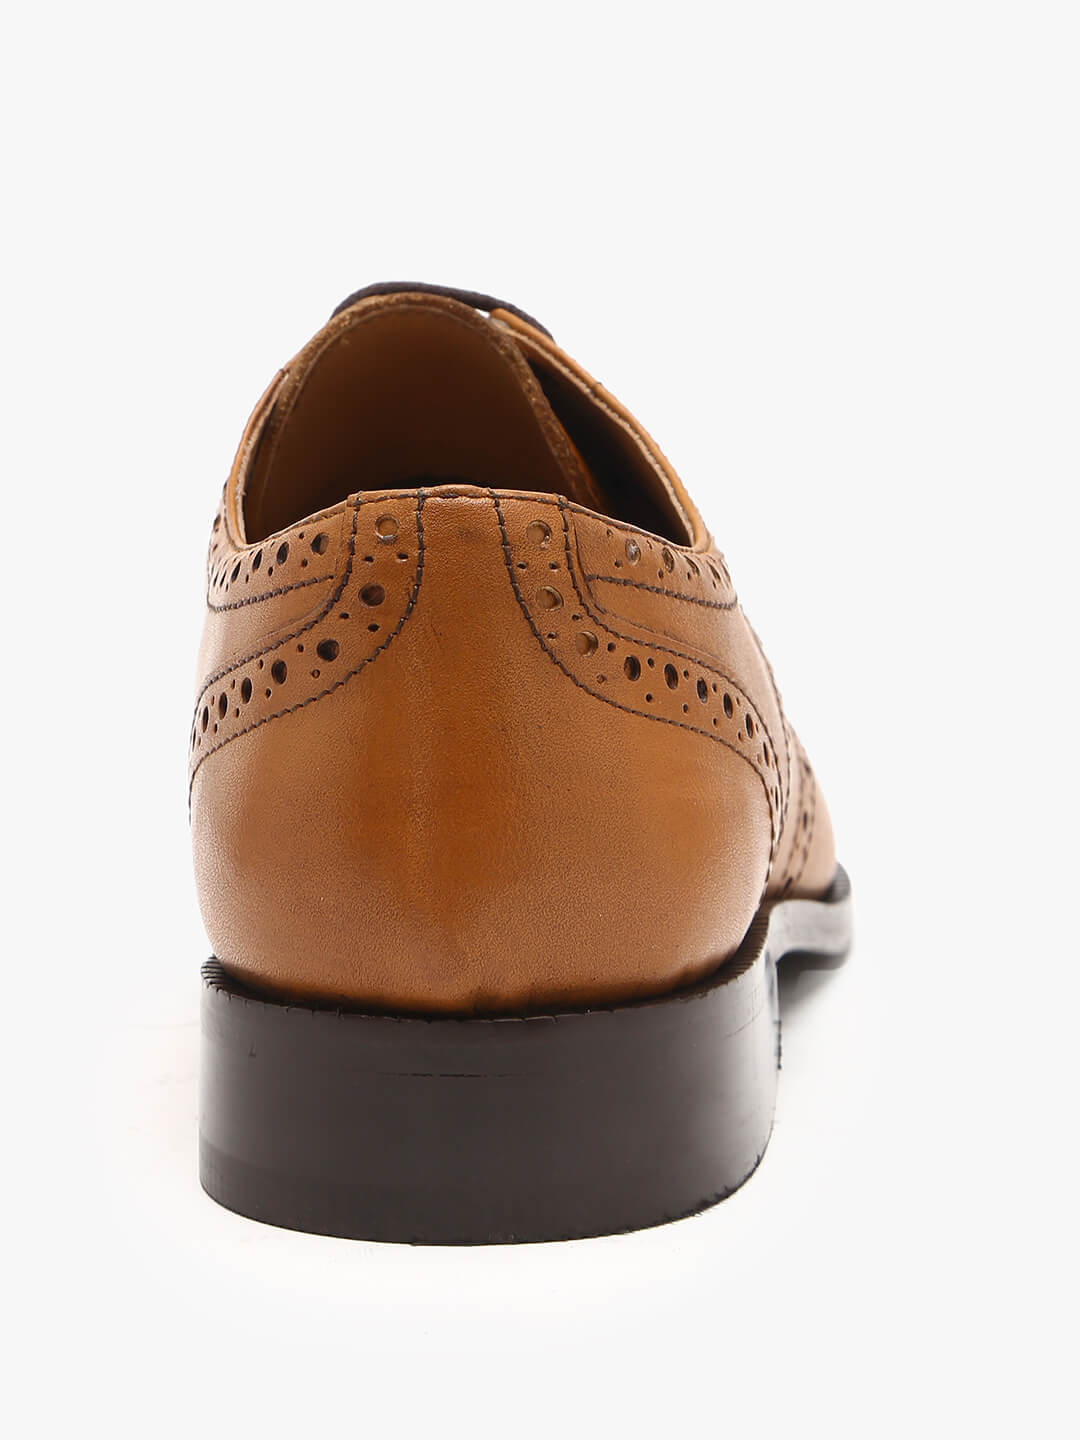 Buy Genuine Leather Tan Derby Brogues Shoes Online